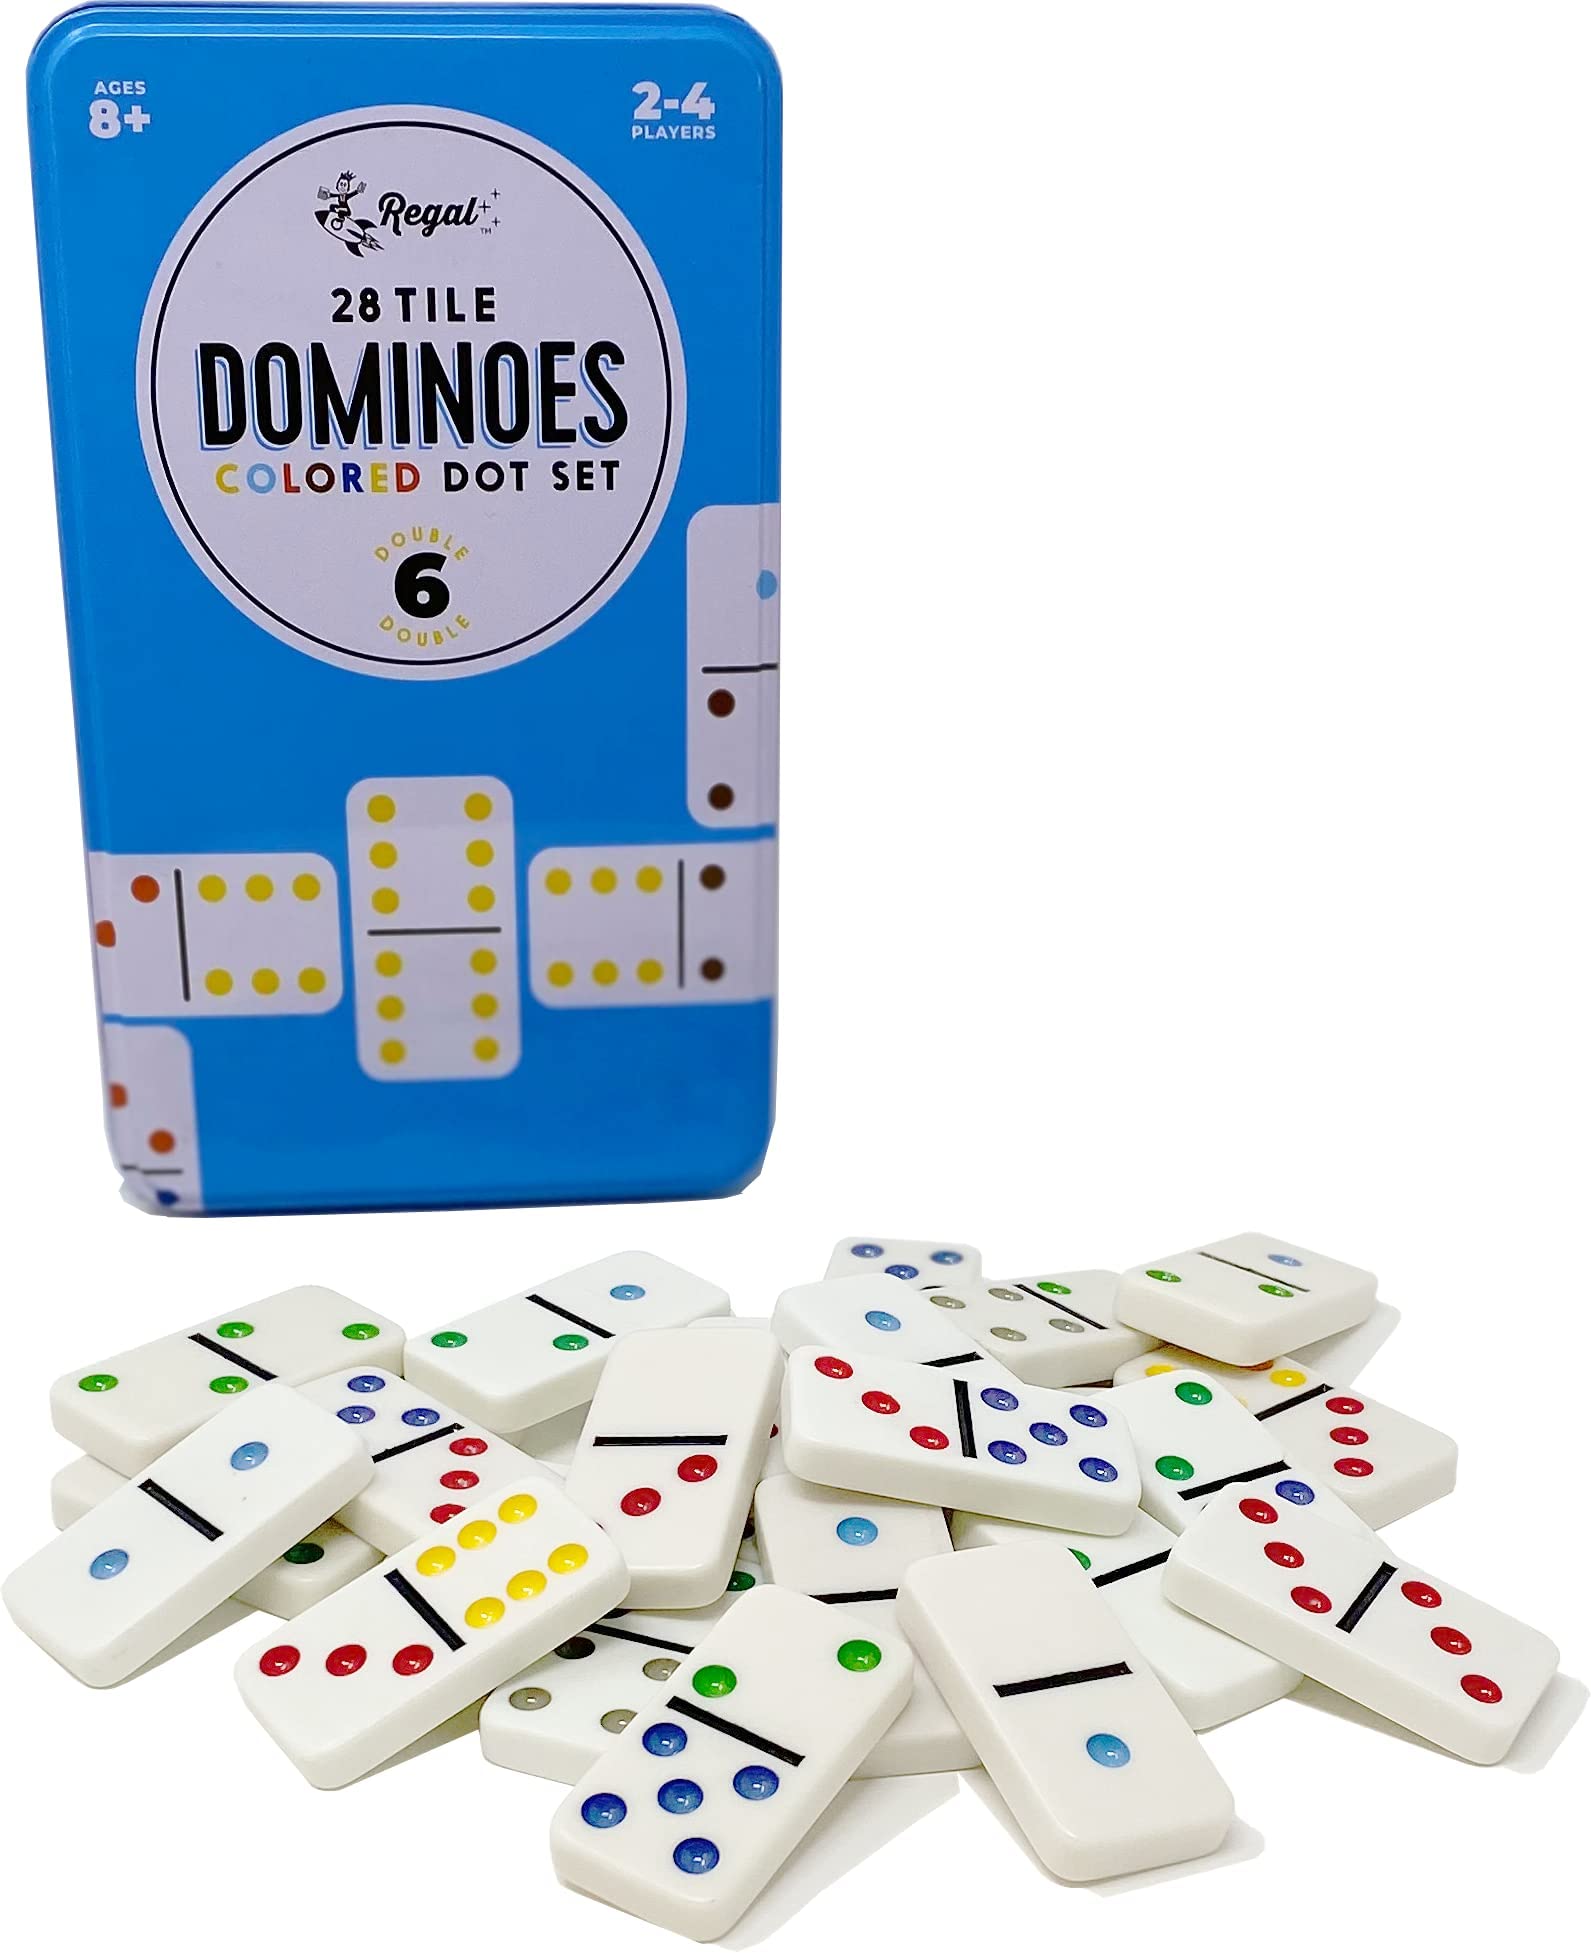 Regal Games - Double 6 Dominoes Set with Colored Dots, 28 Tiles and Collector's Tin